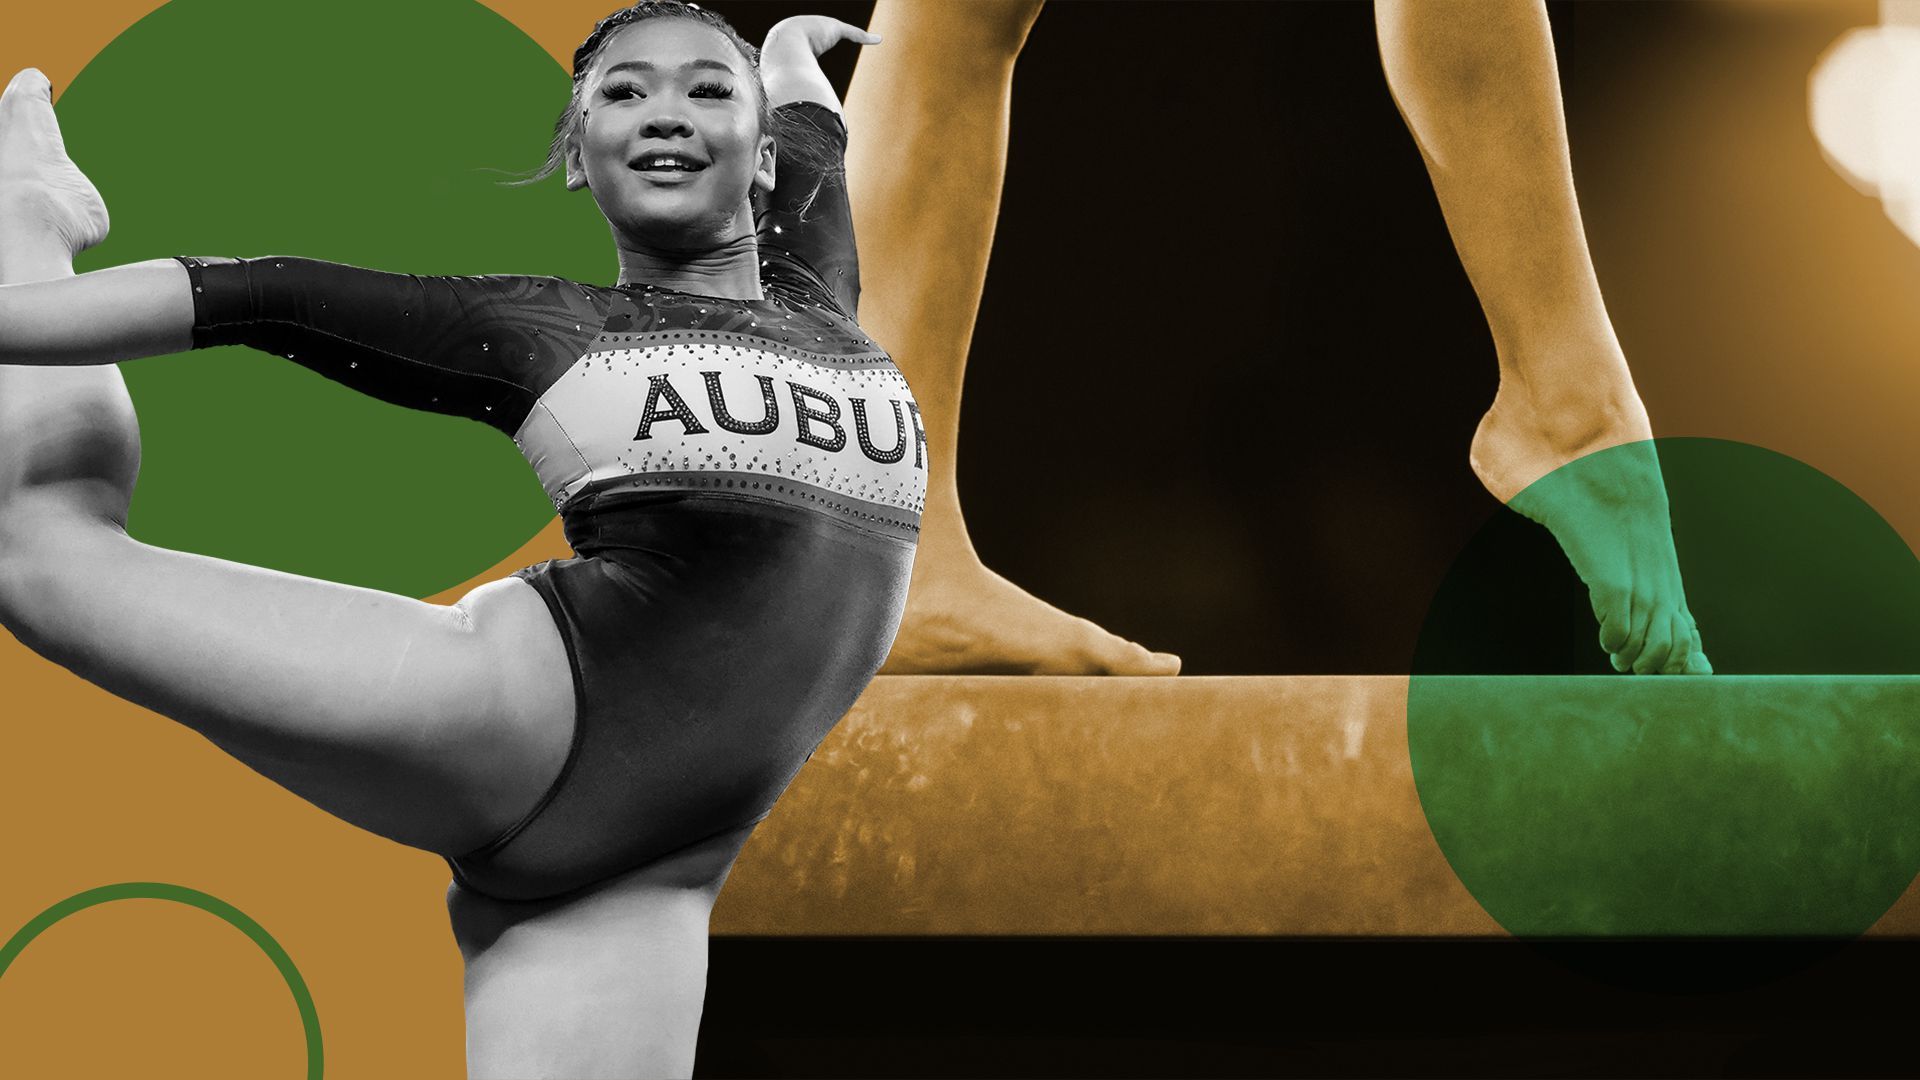 Photo illustration of Suni Lee with a gymnast on a balance beam in the background.